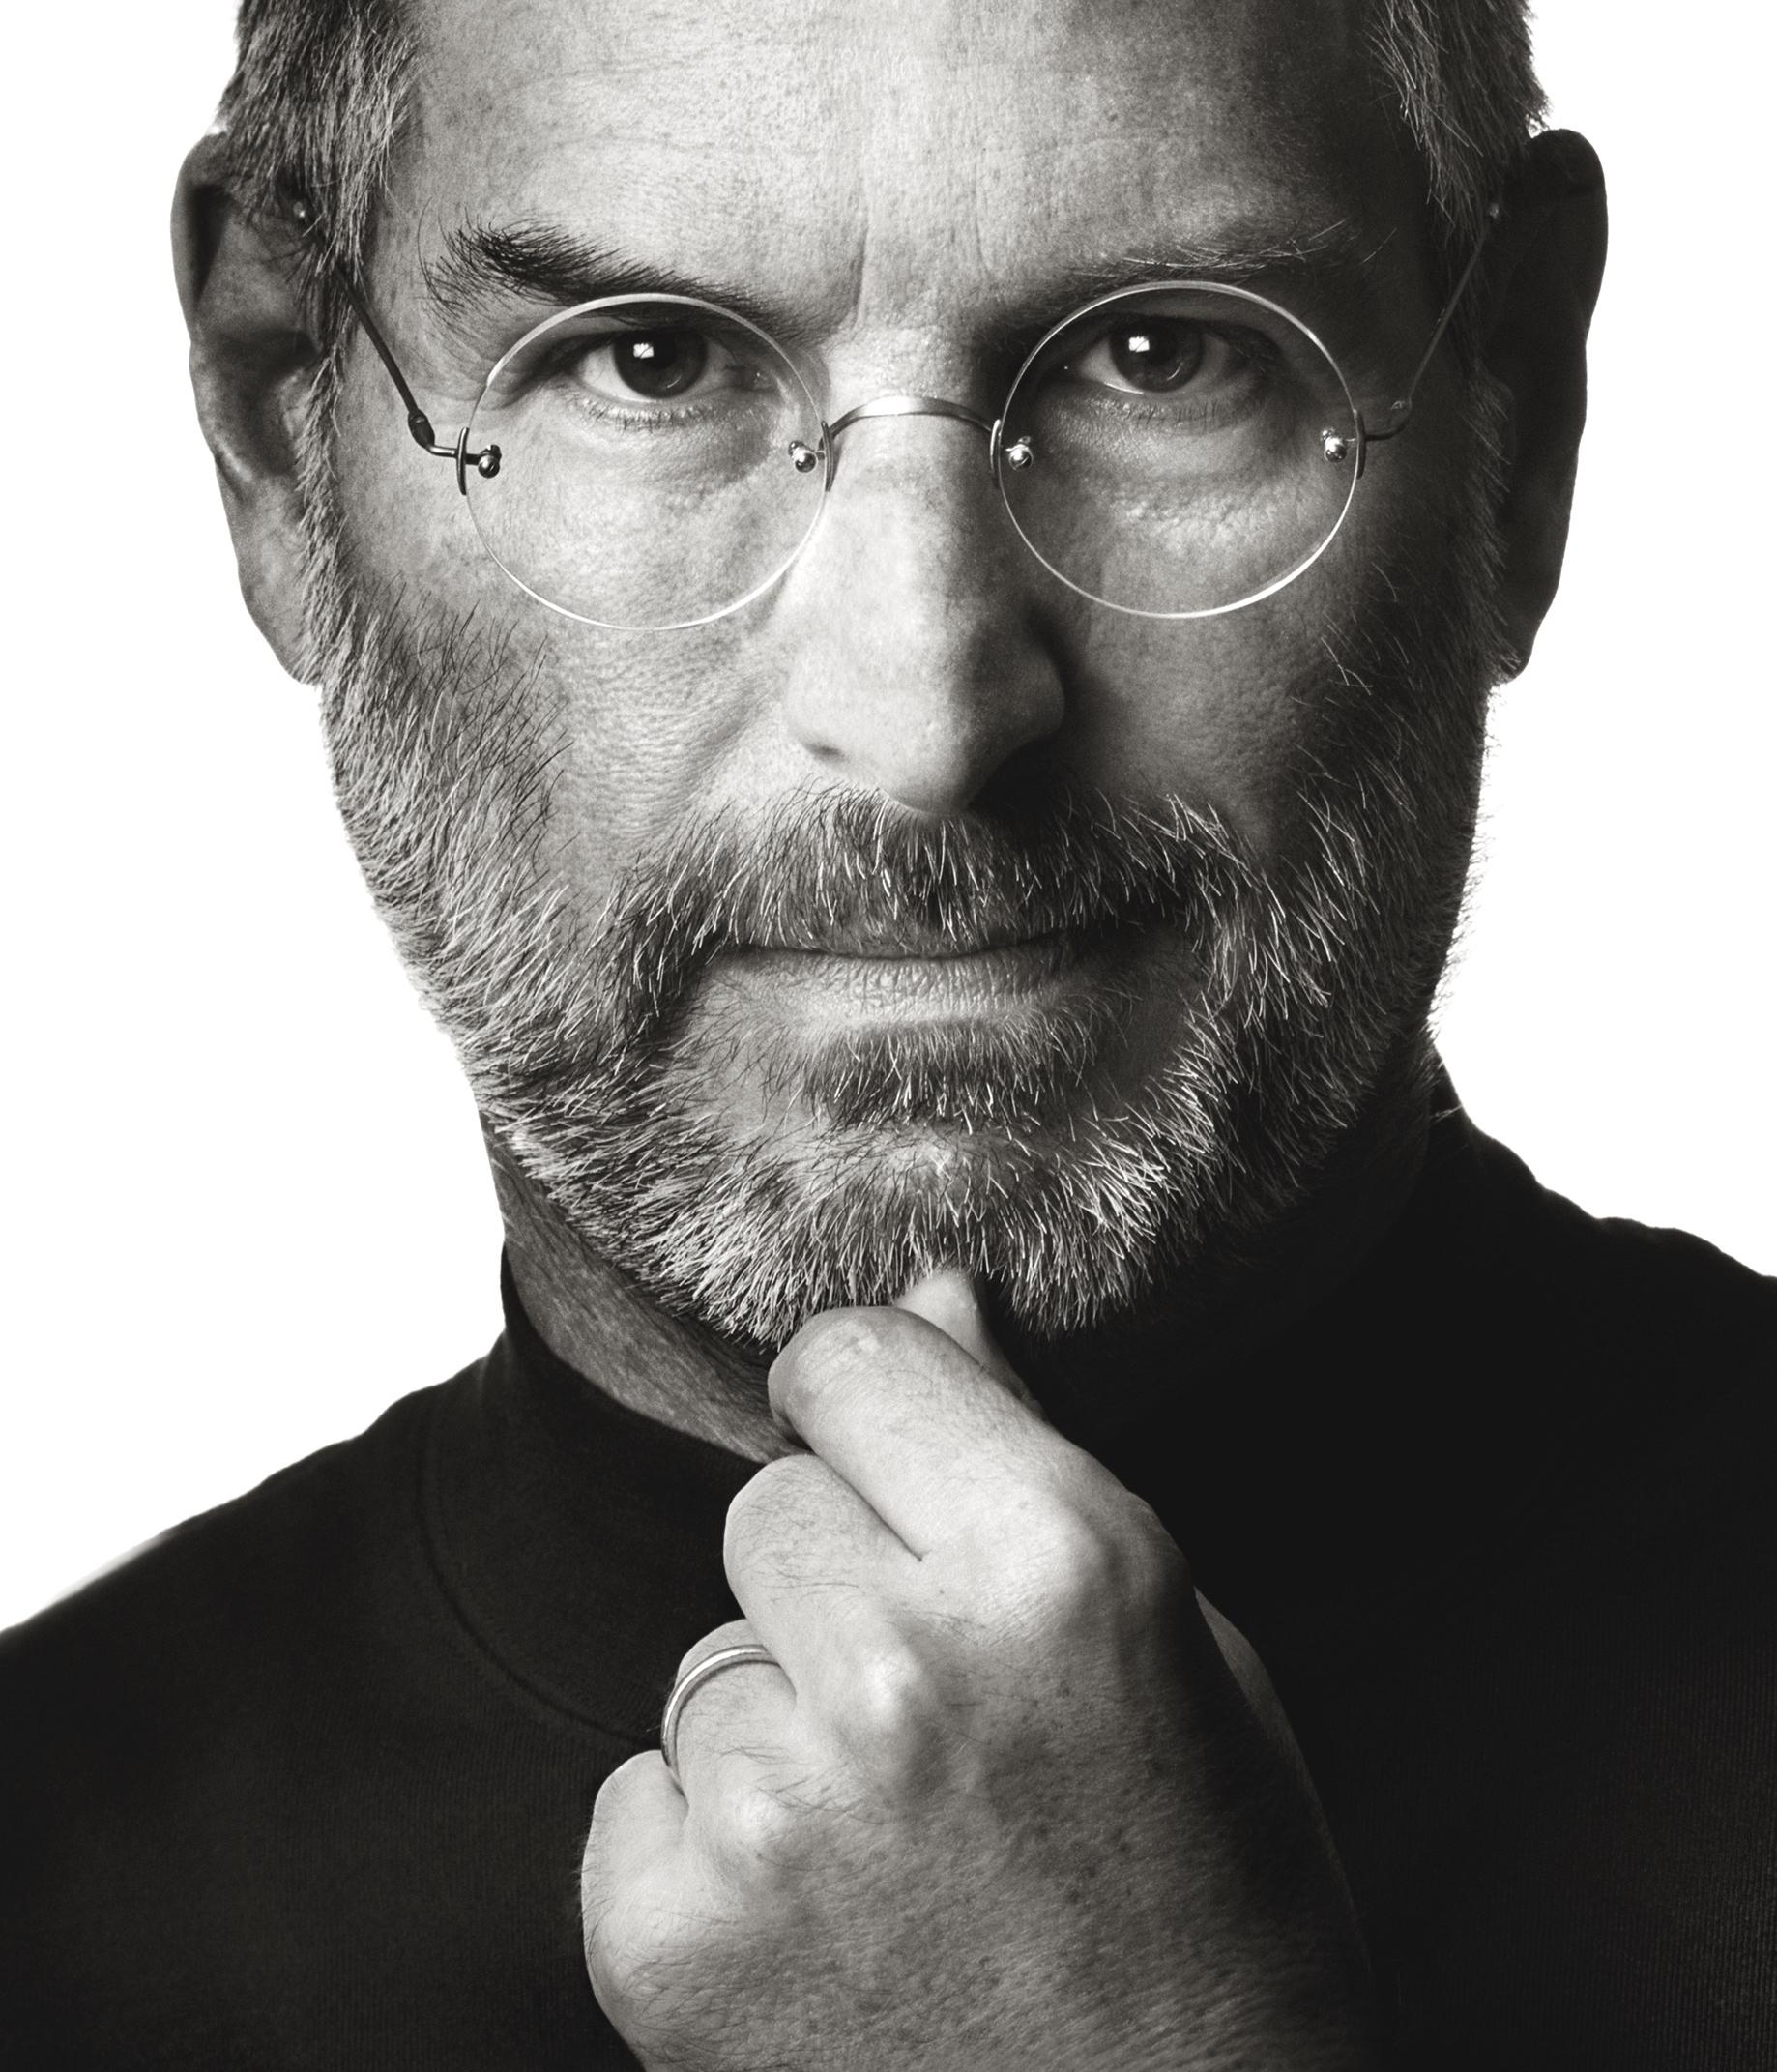 Albert WATSON (*1942, Scotland)
Steve Jobs, 2001
Archival pigment print
142 x 107 cm (55 7/8 x 42 1/8 in.)
Edition of 10; Ed. no. 1/10 (from a completely sold out edition)
Print only

Albert Watson was born 1942 in Edinburgh, Scotland.

He currently